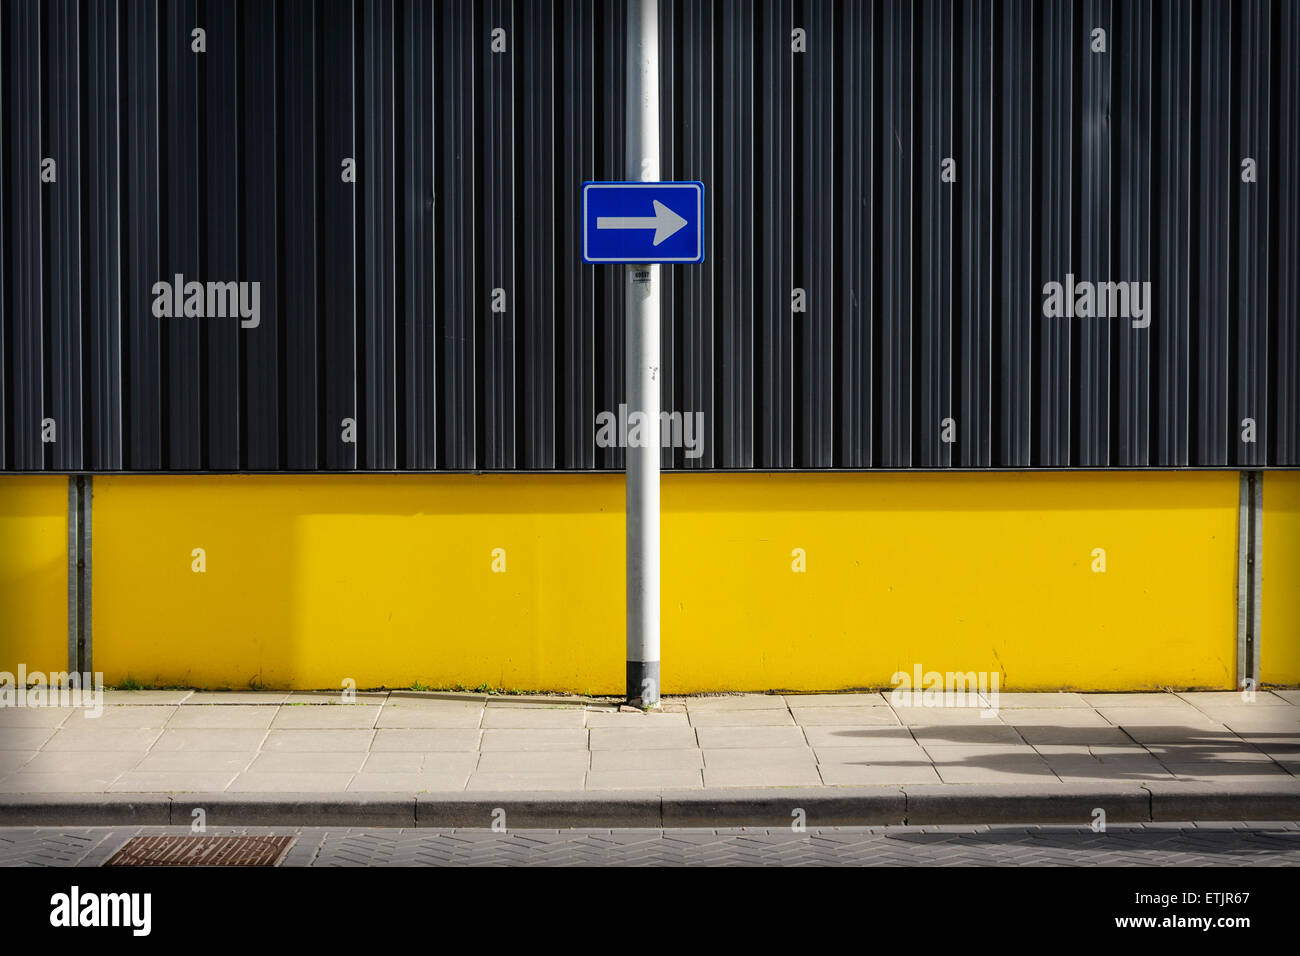 Traffic sign, arrow pointing right against yellow wall Stock Photo